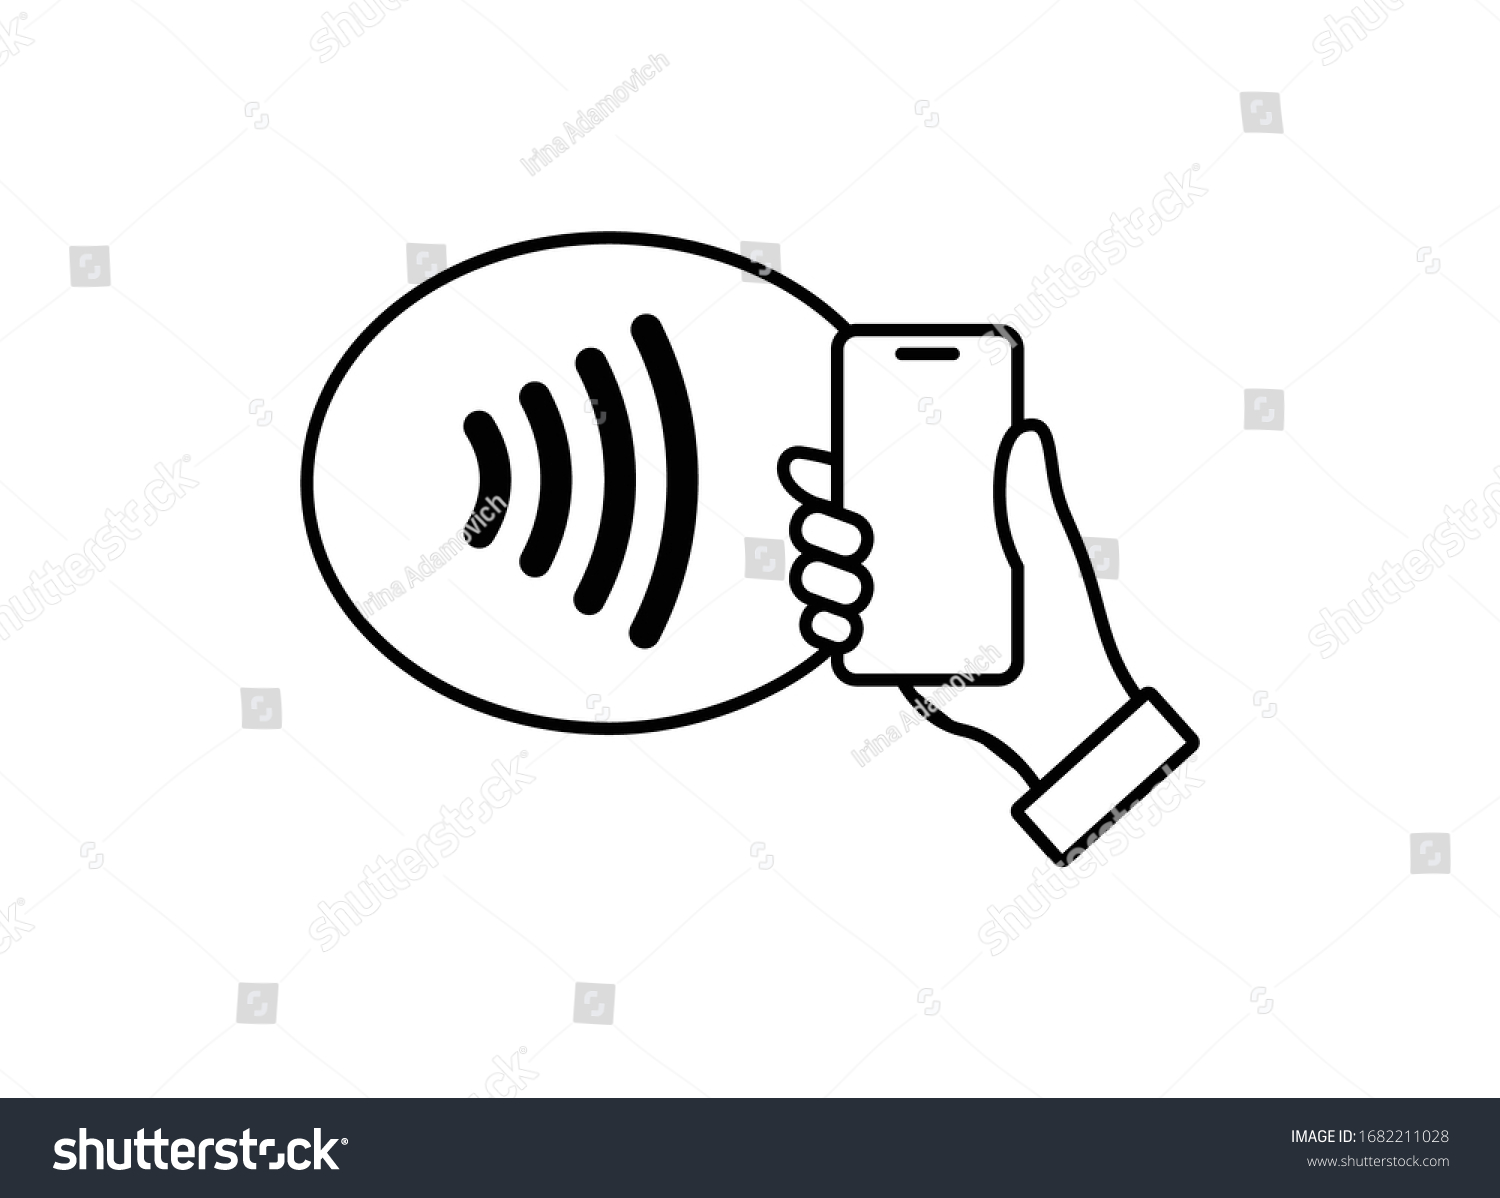 NFC technology vector icon. Hand holding Phone, Smartphone, wawe simple line outline  sign. Near Field Communication nfc payment concept. Flat design isolated on white. #1682211028